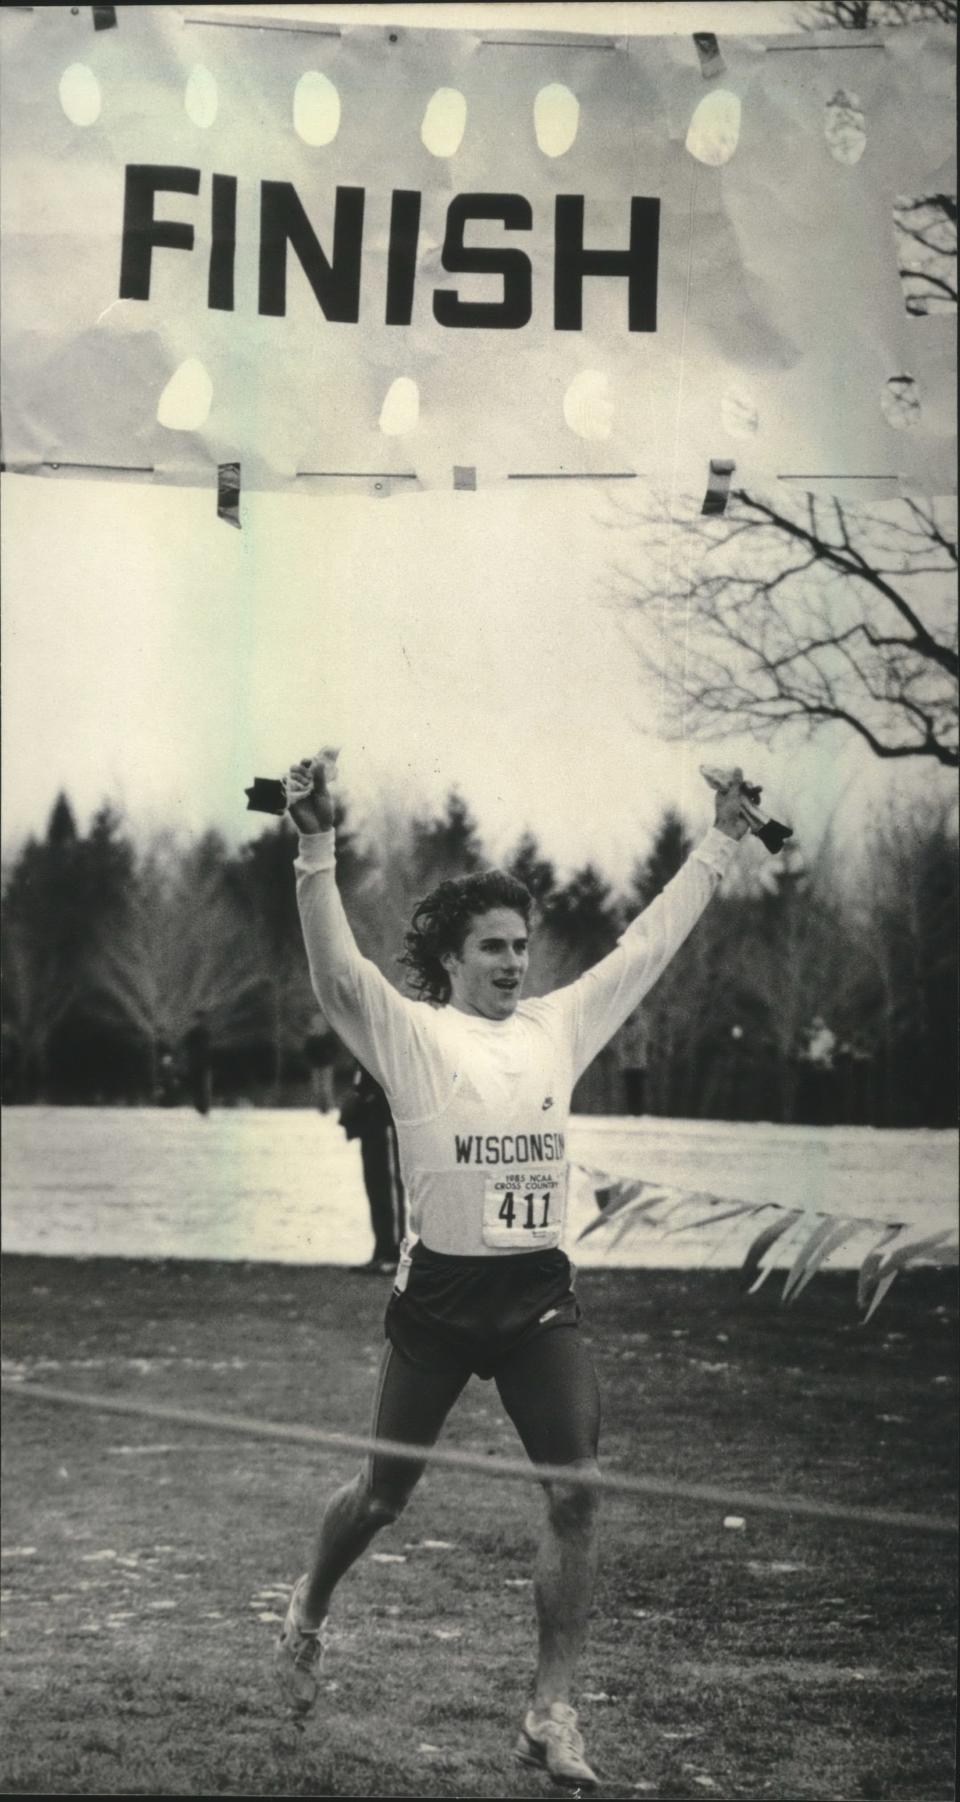 Tim Hacker of the University of Wisconsin celebrated while crossing the finish line in 1985 to win the NCAA cross country men's championship at Dretzka Park, helping the Badgers win the team title that year, as well.